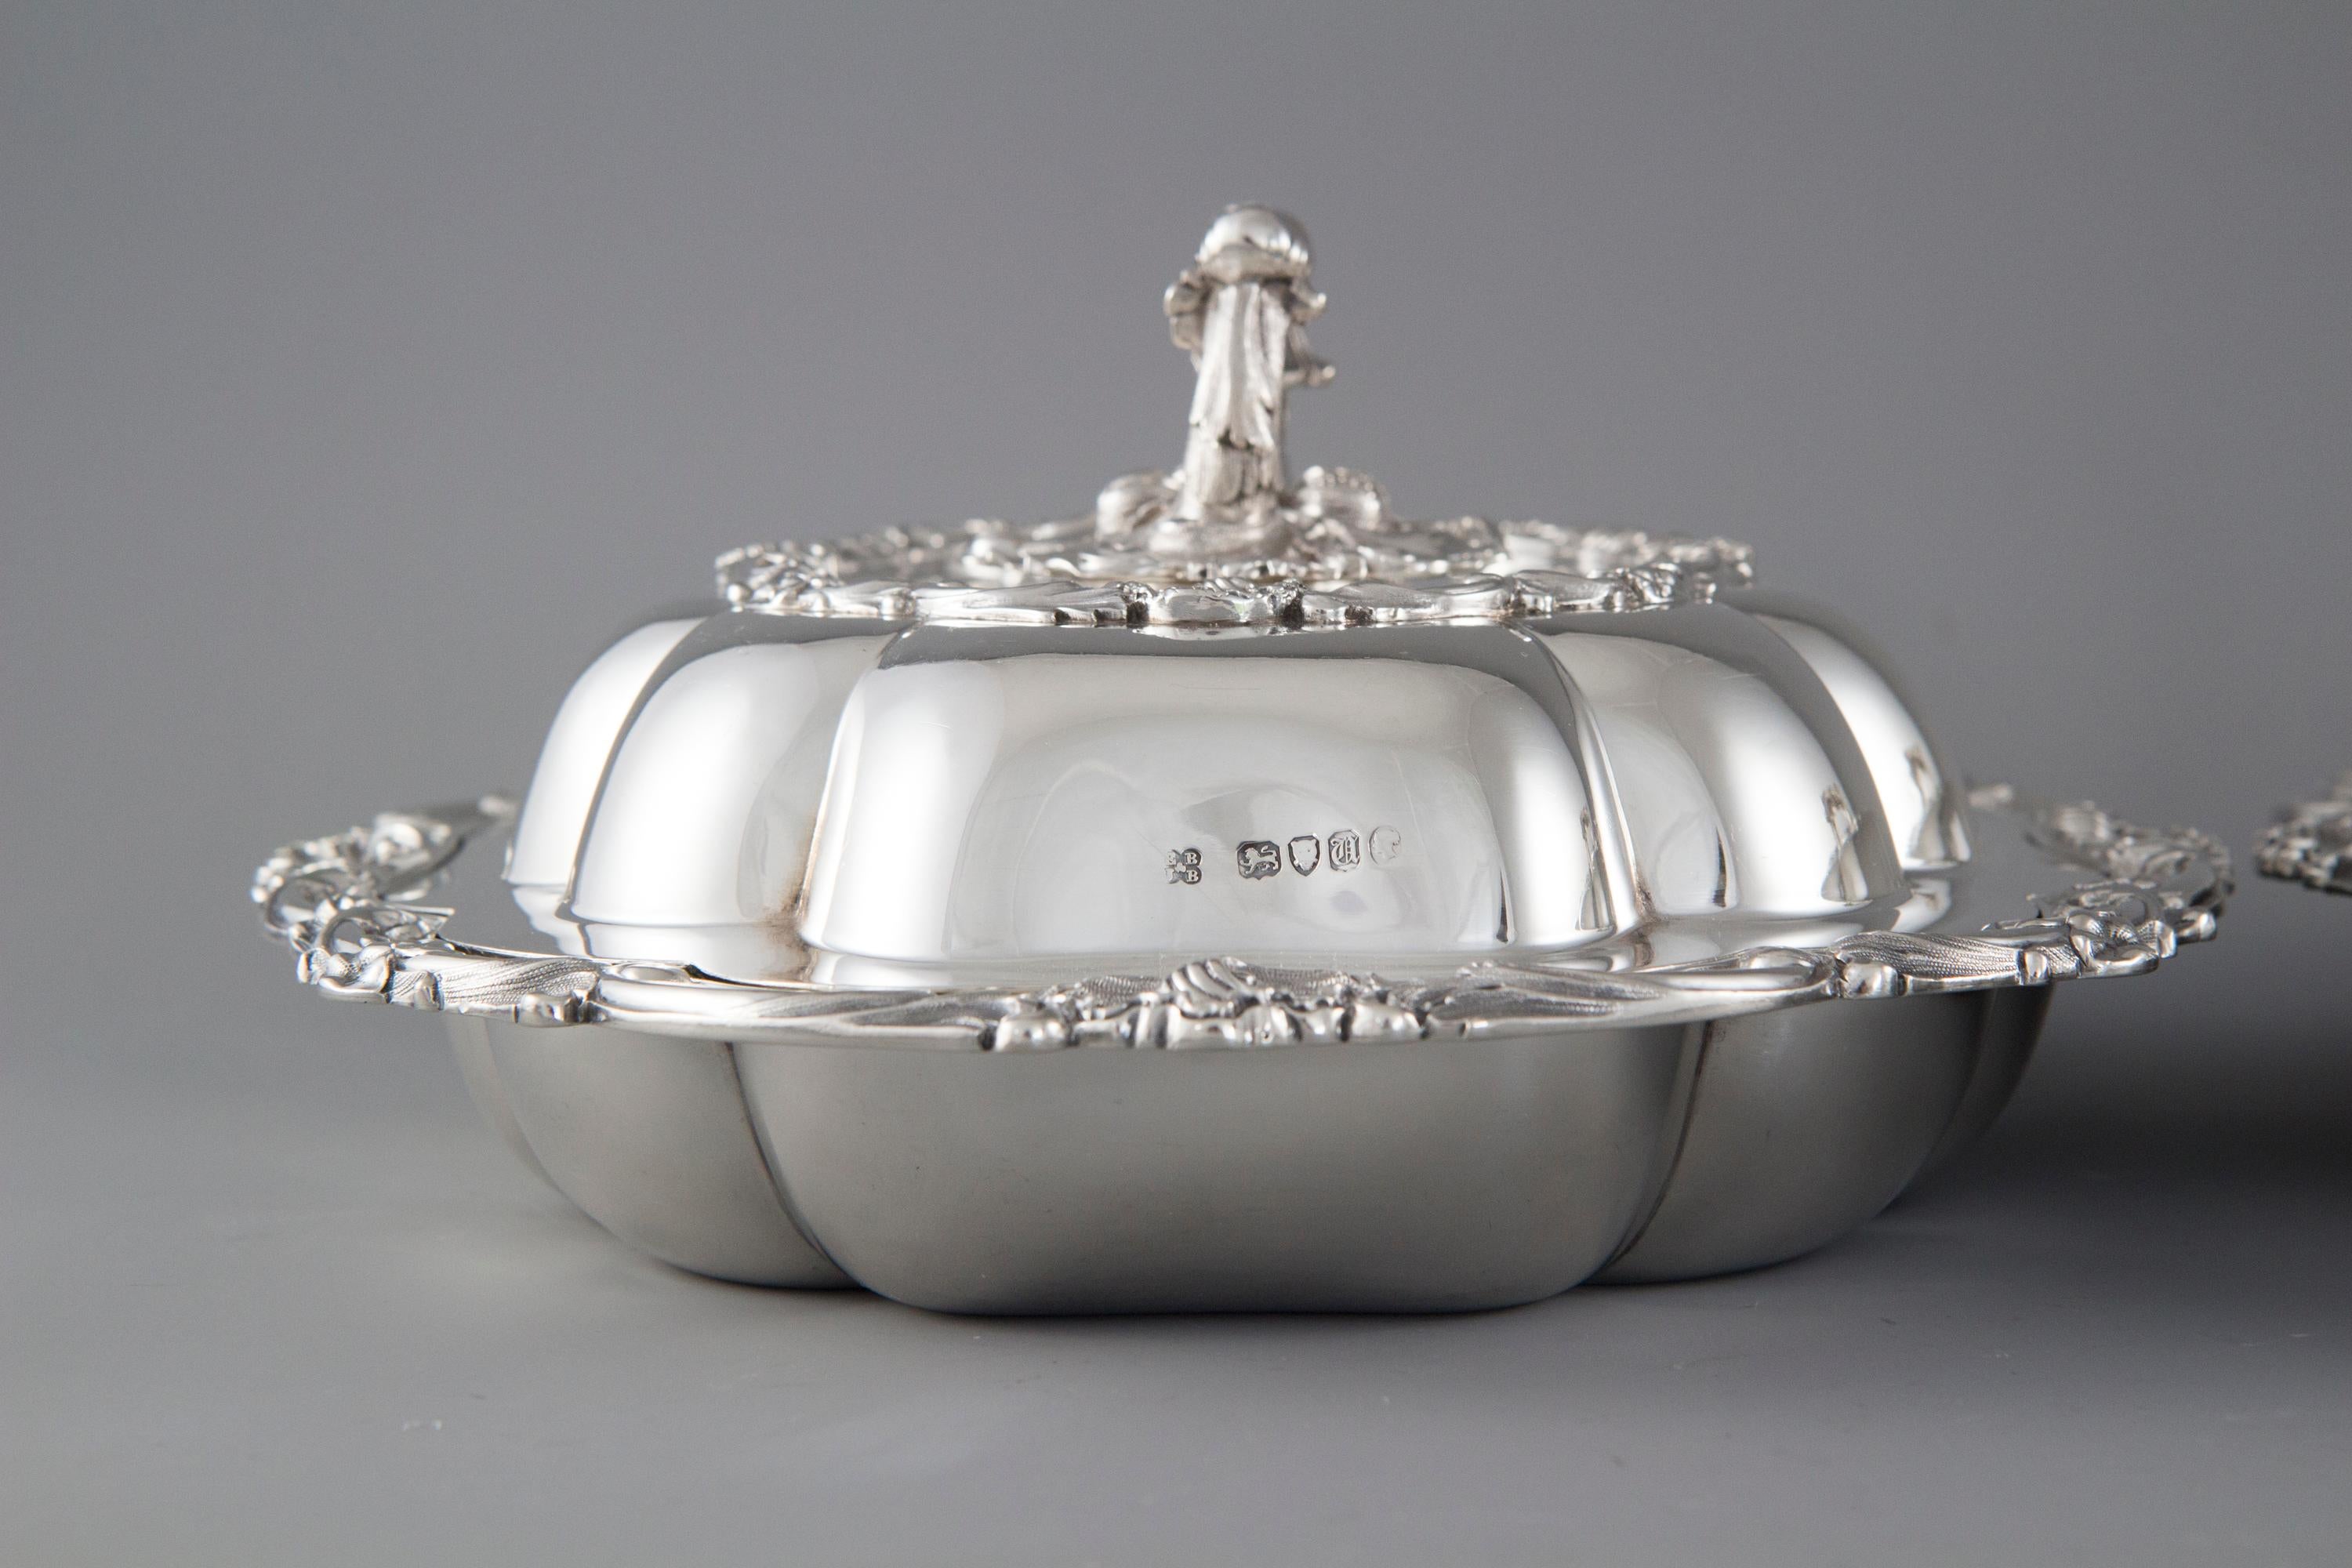 Pair of Victorian Silver Entree or Serving Dishes, Barnards, London, 1855 10